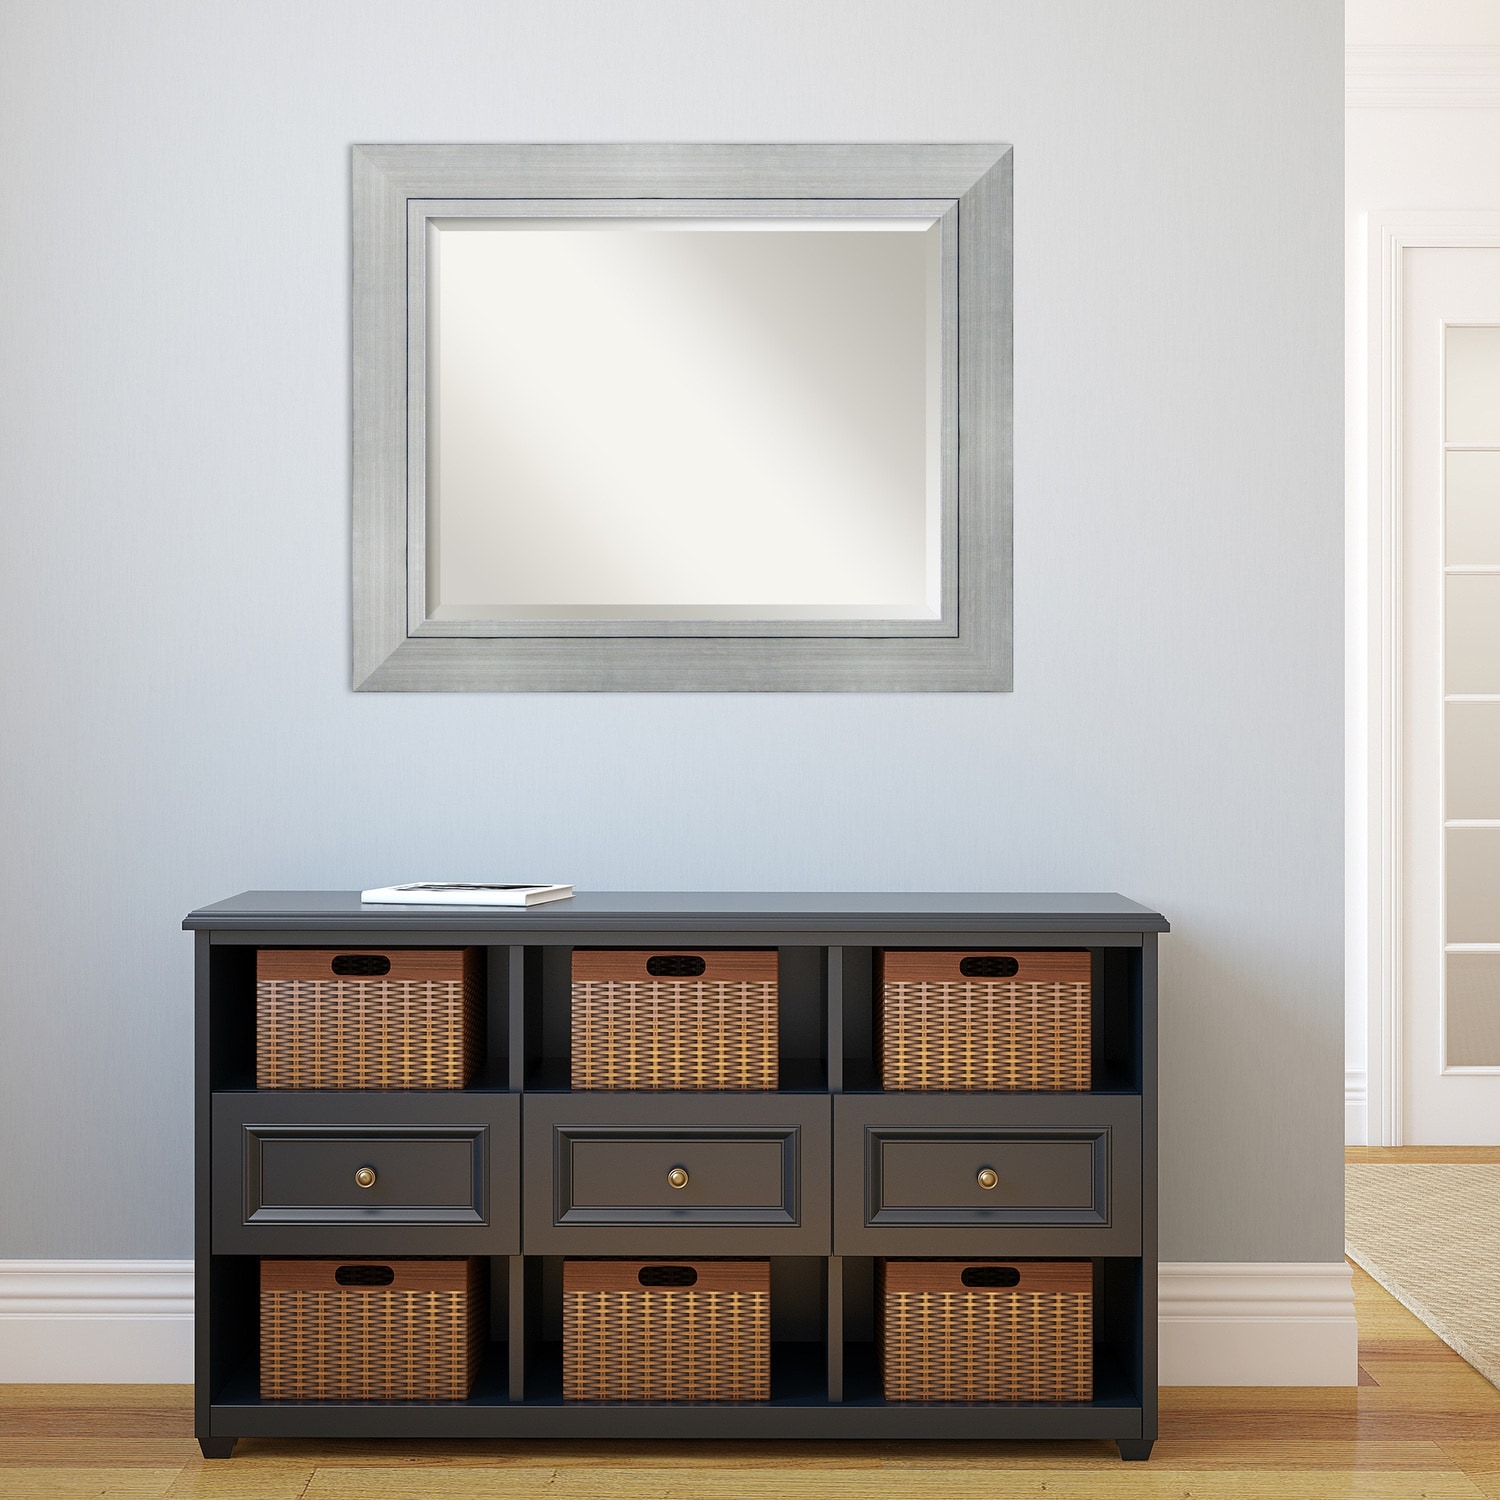 Beveled Wood Wall Mirror - Romano Silver Frame - Outer Size: 35 x 29 in